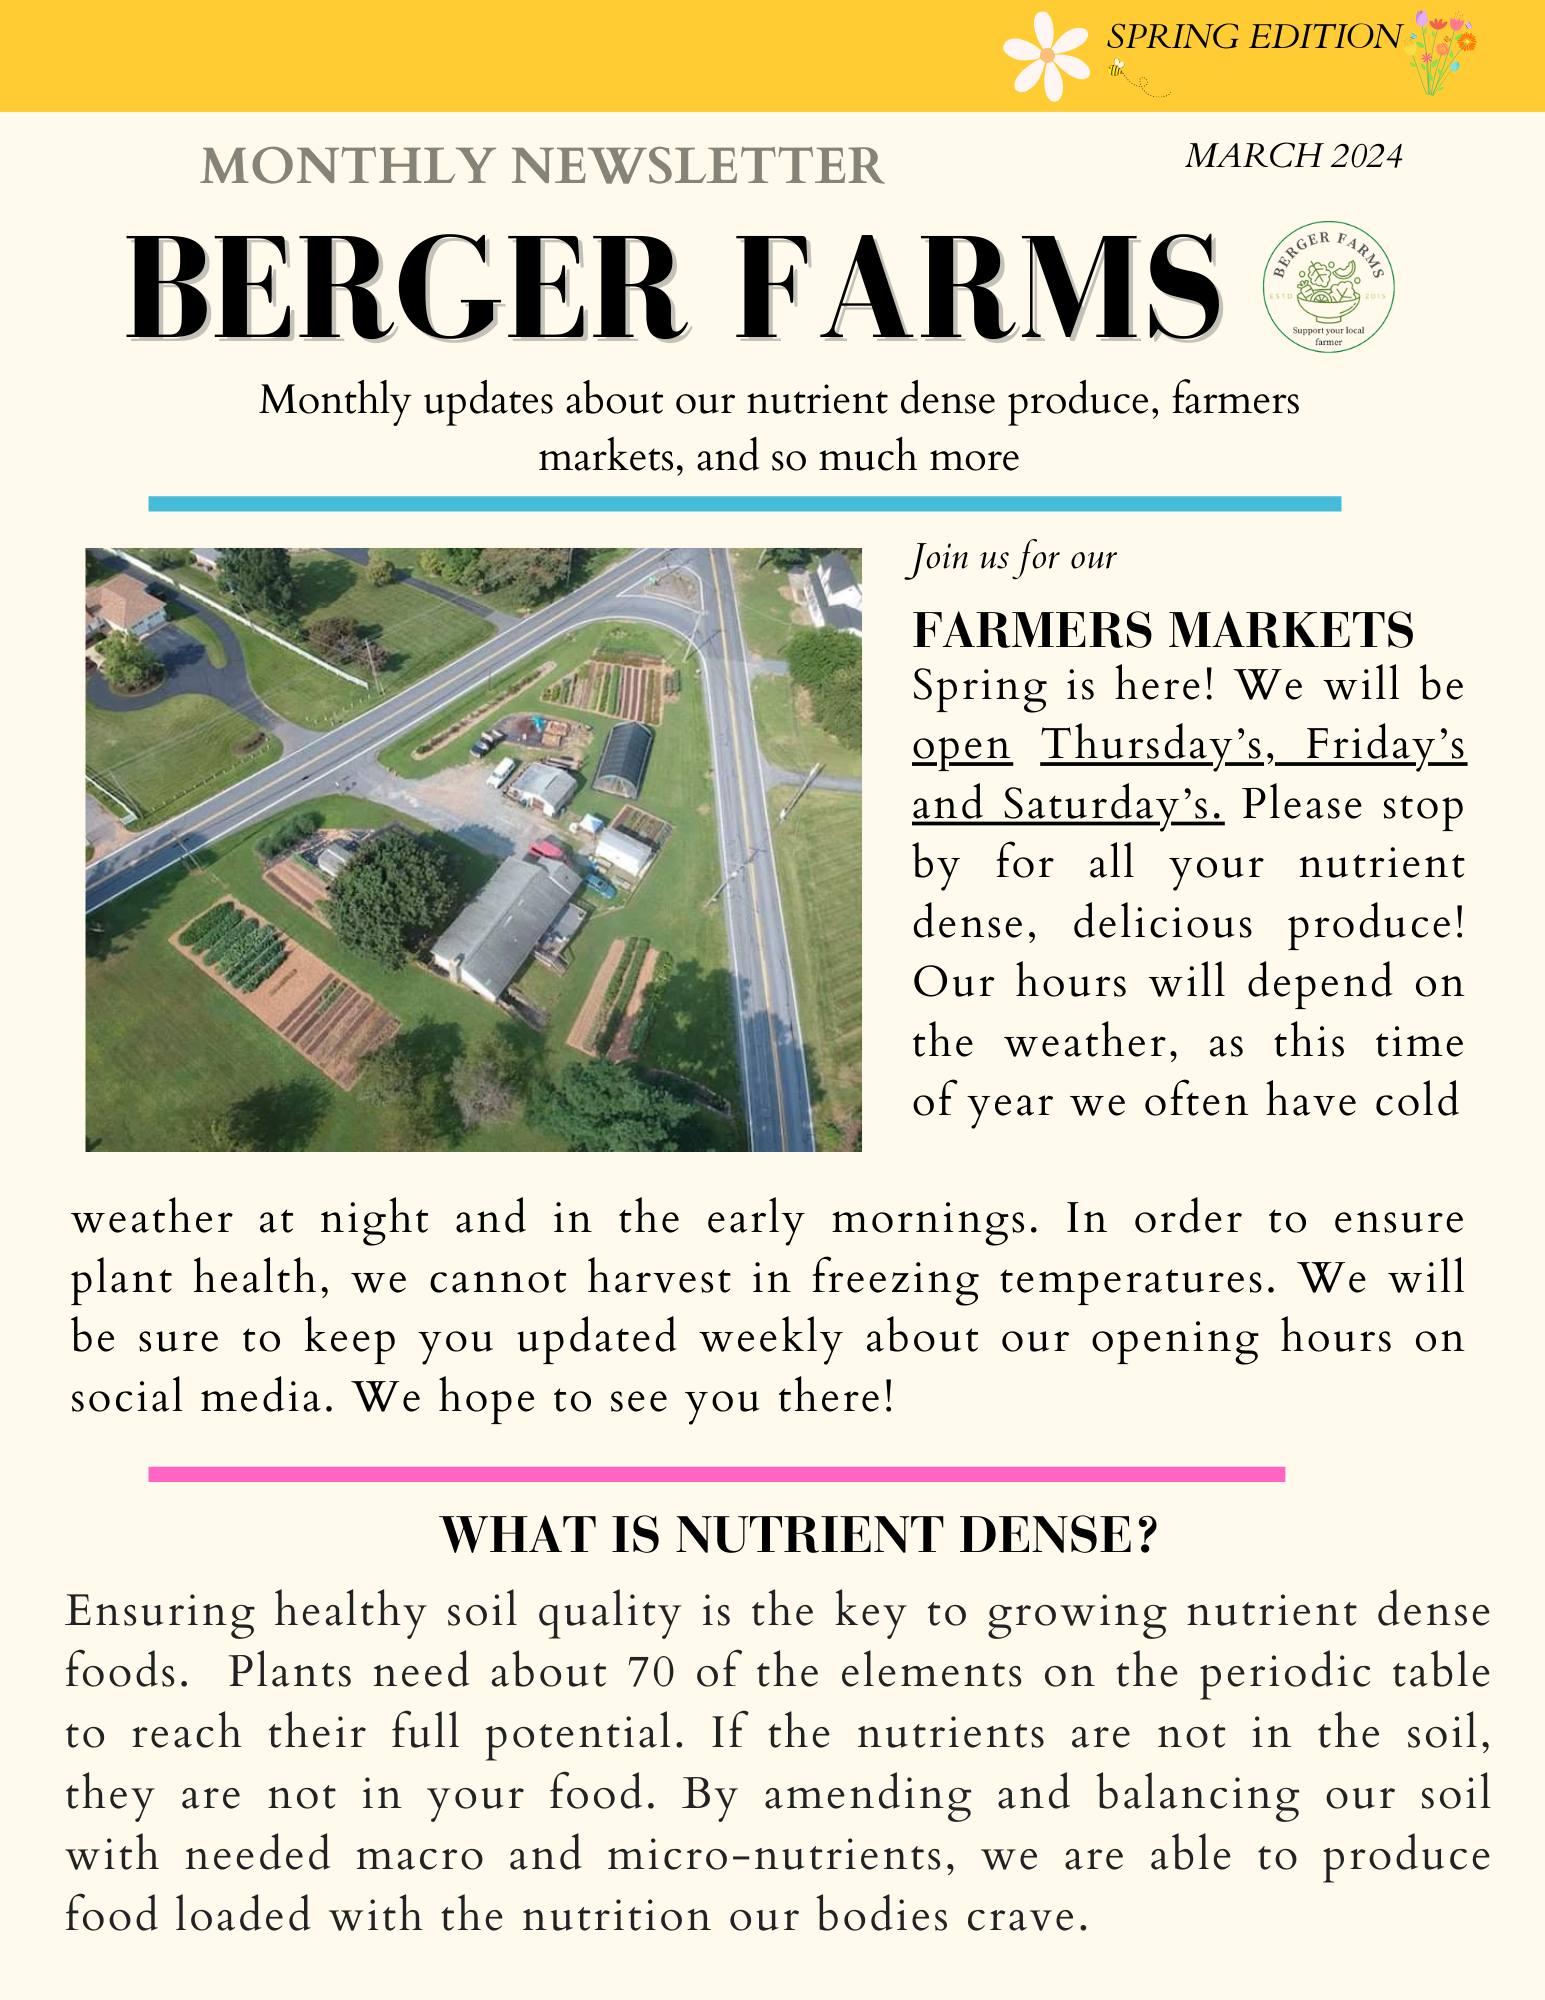 Berger's Tree Services